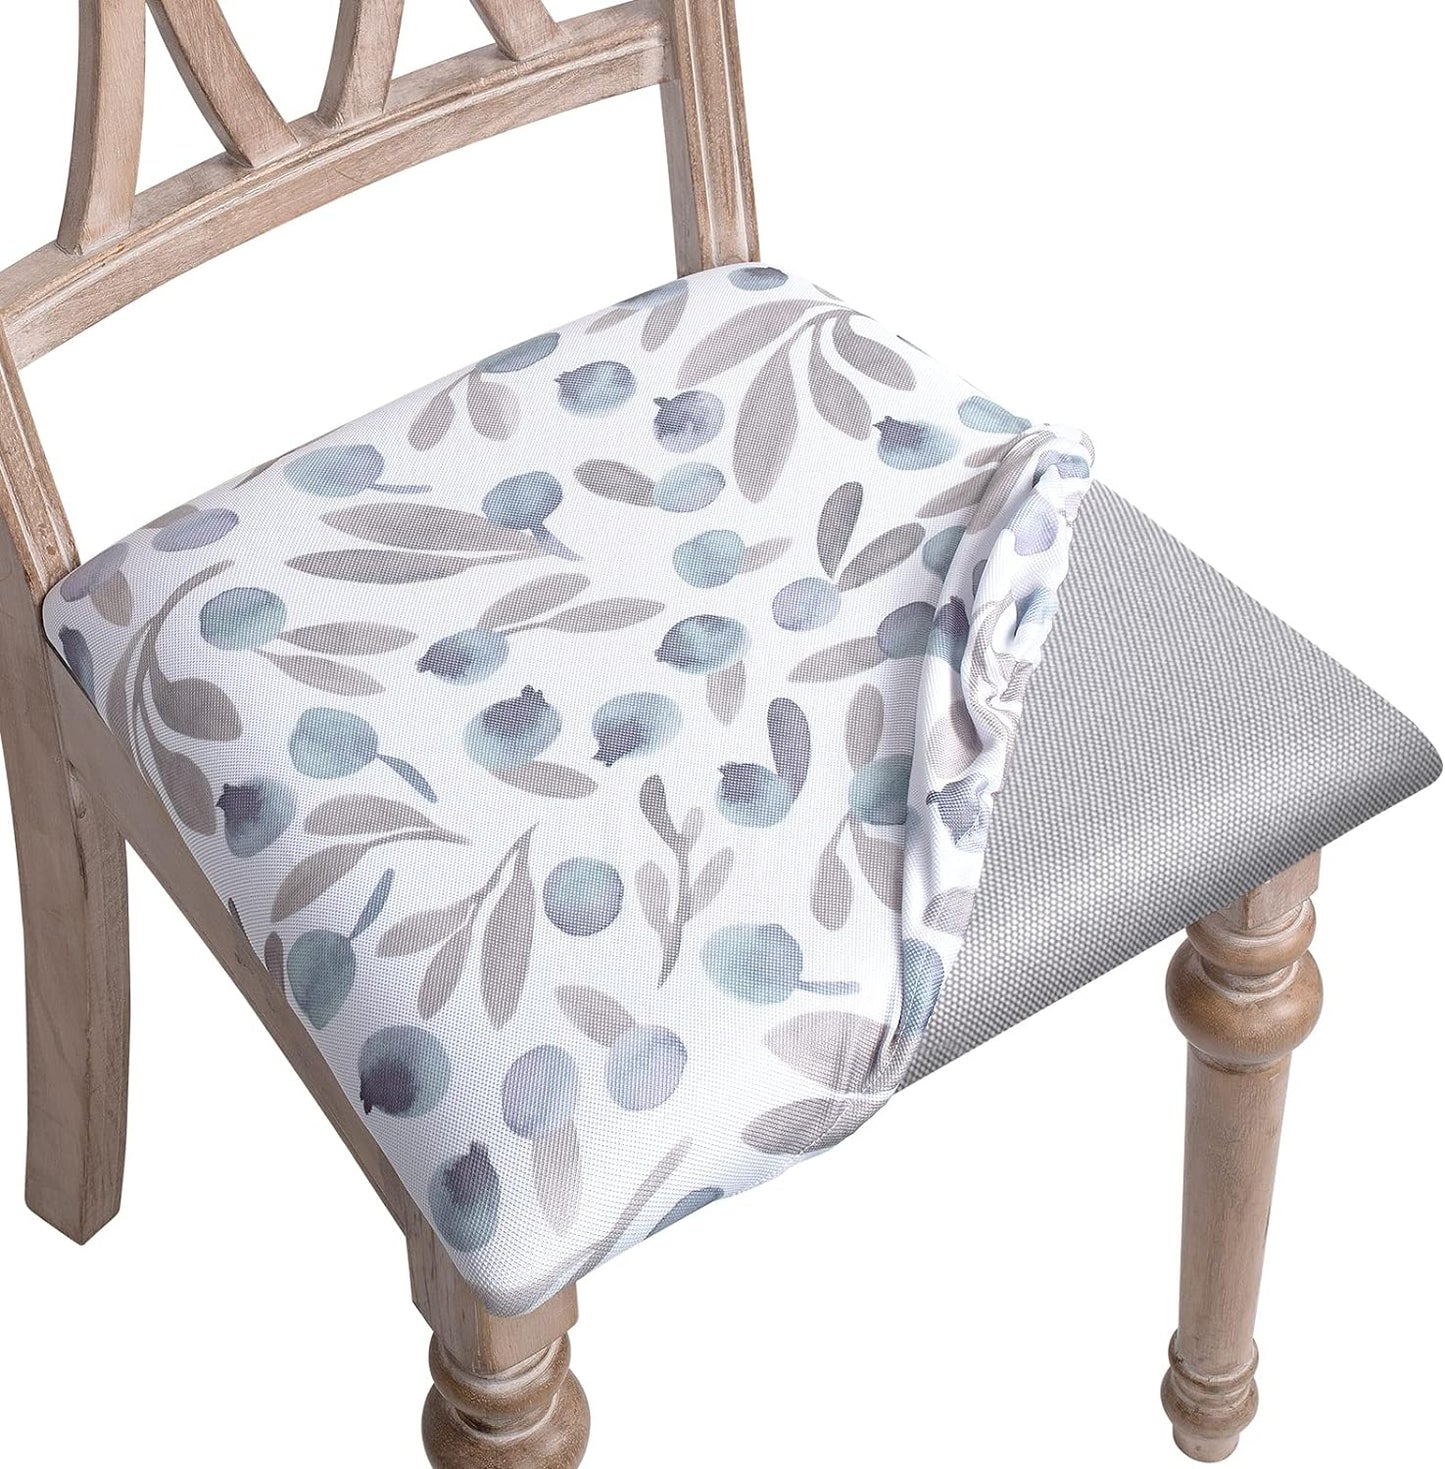 Sunlit Chair Covers for Dining Room, Stretch Printed Washable Chair Seat Covers Set of 4, Removable Upholstered Chair Seat Protector Cushion Slipcovers for Kitchen Office, Gray & Blue Leaf